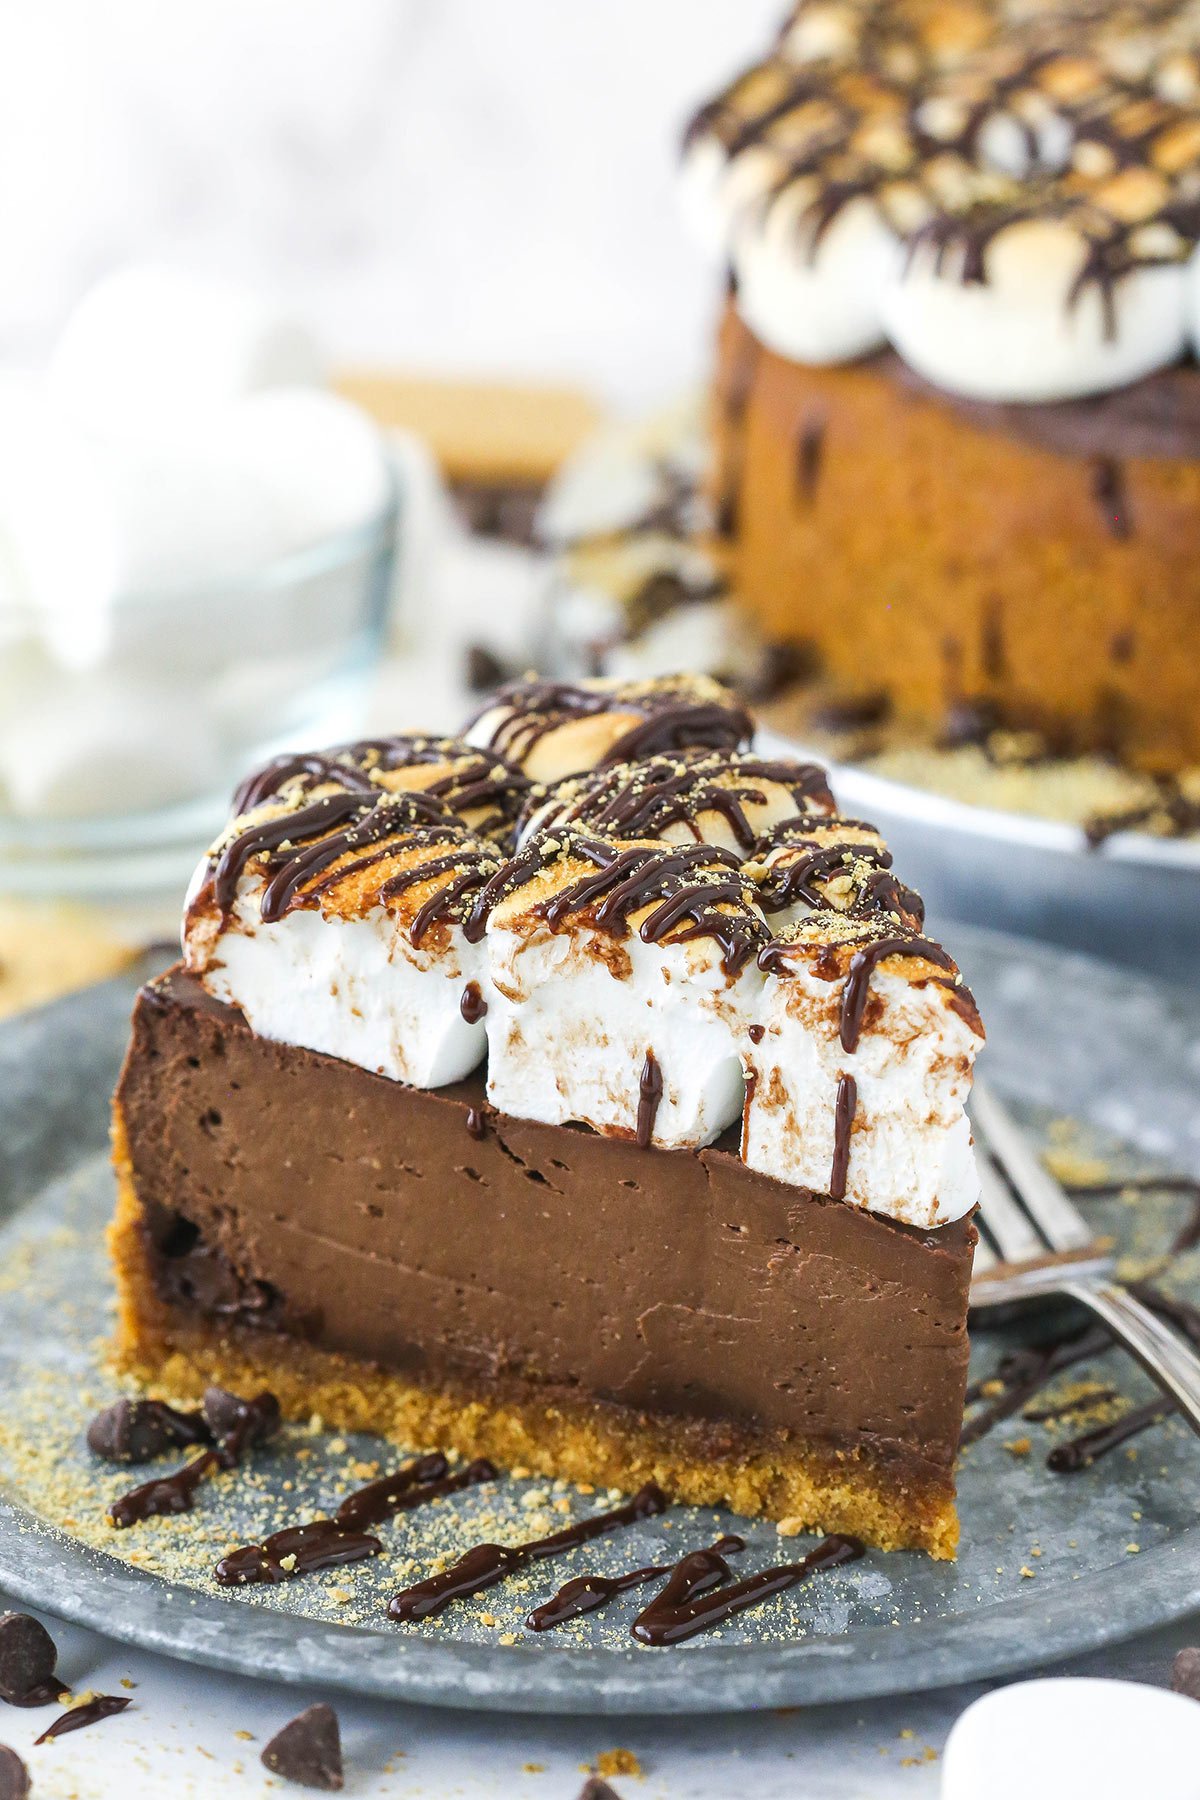 A slice of homemade chocolate smores cheesecake on a plate with the full cake in the background